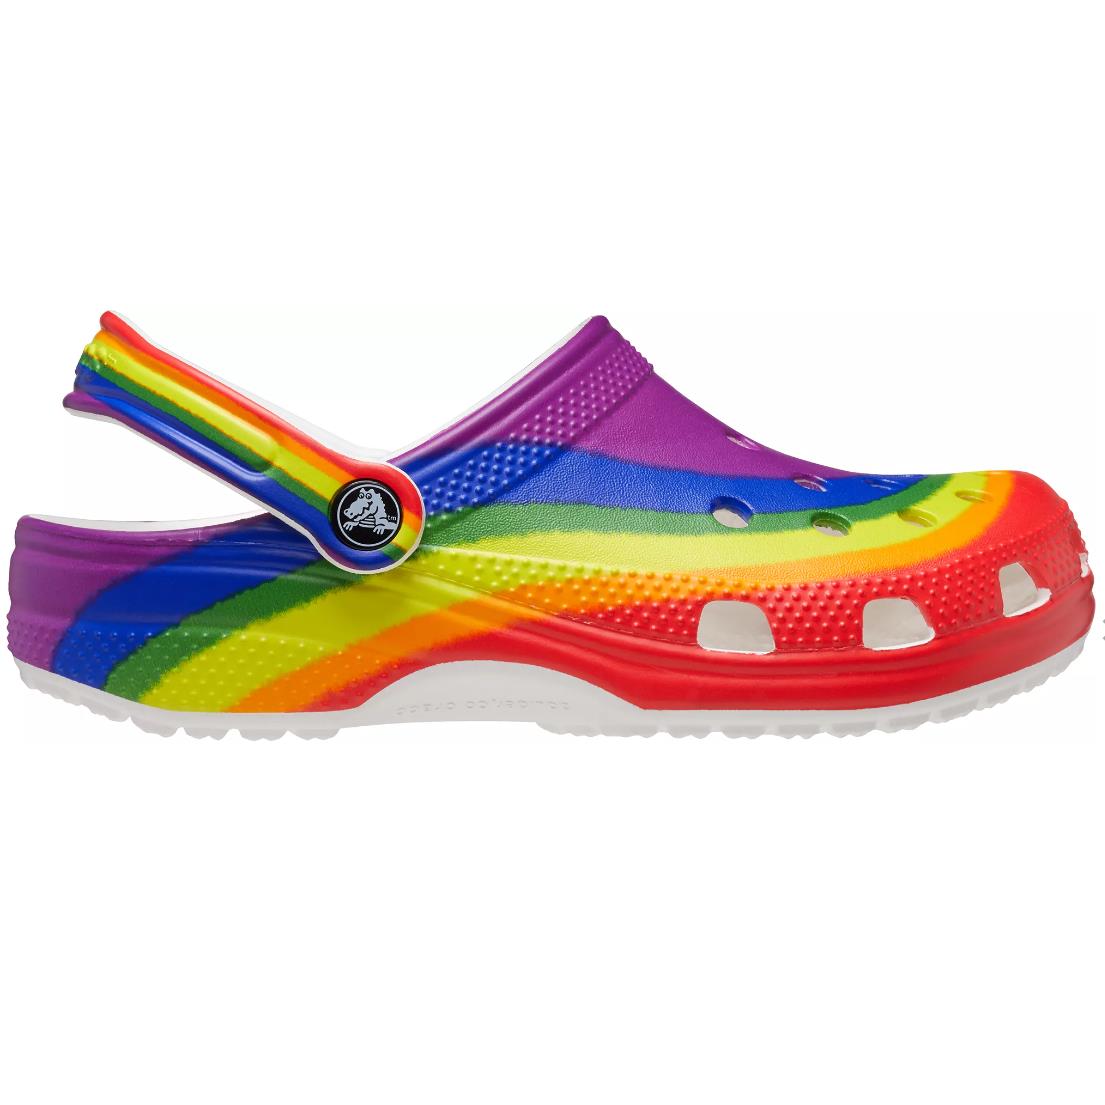 Crocs Classic Rainbow Dye Multicolor Clog Casual Shoes Colorful All Sizes